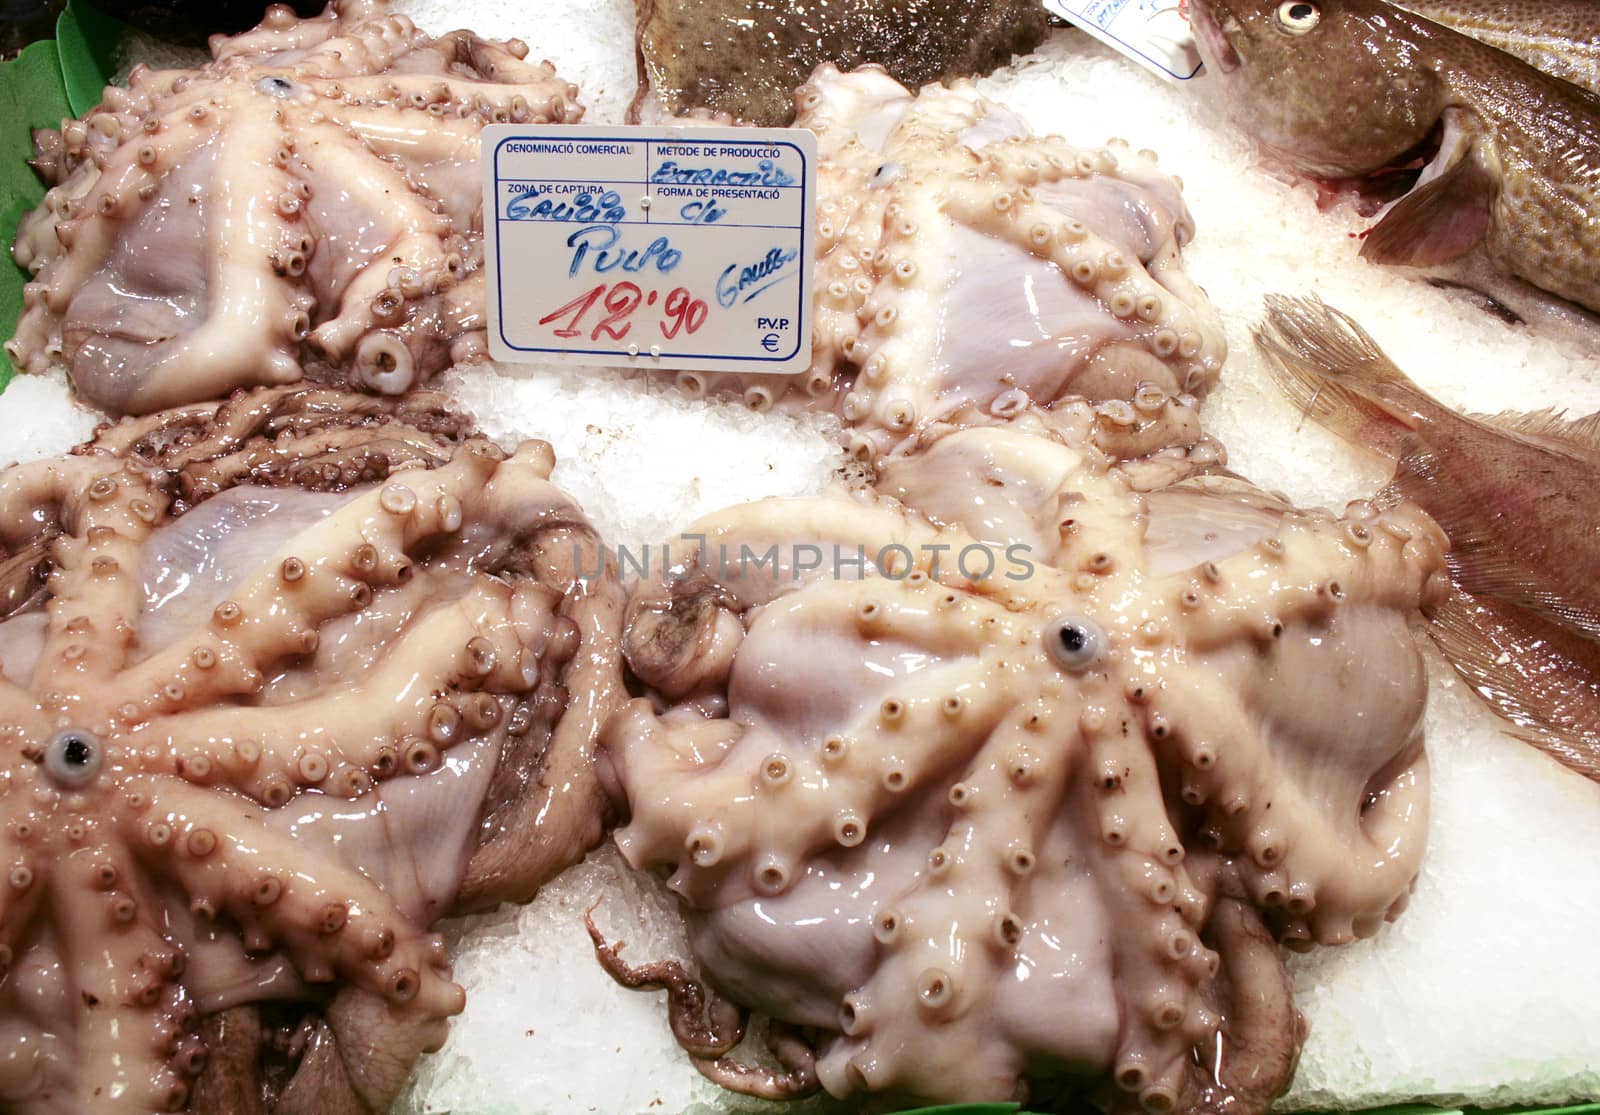 Fresh octopus on display on ice, with price, at Barcelona fish market